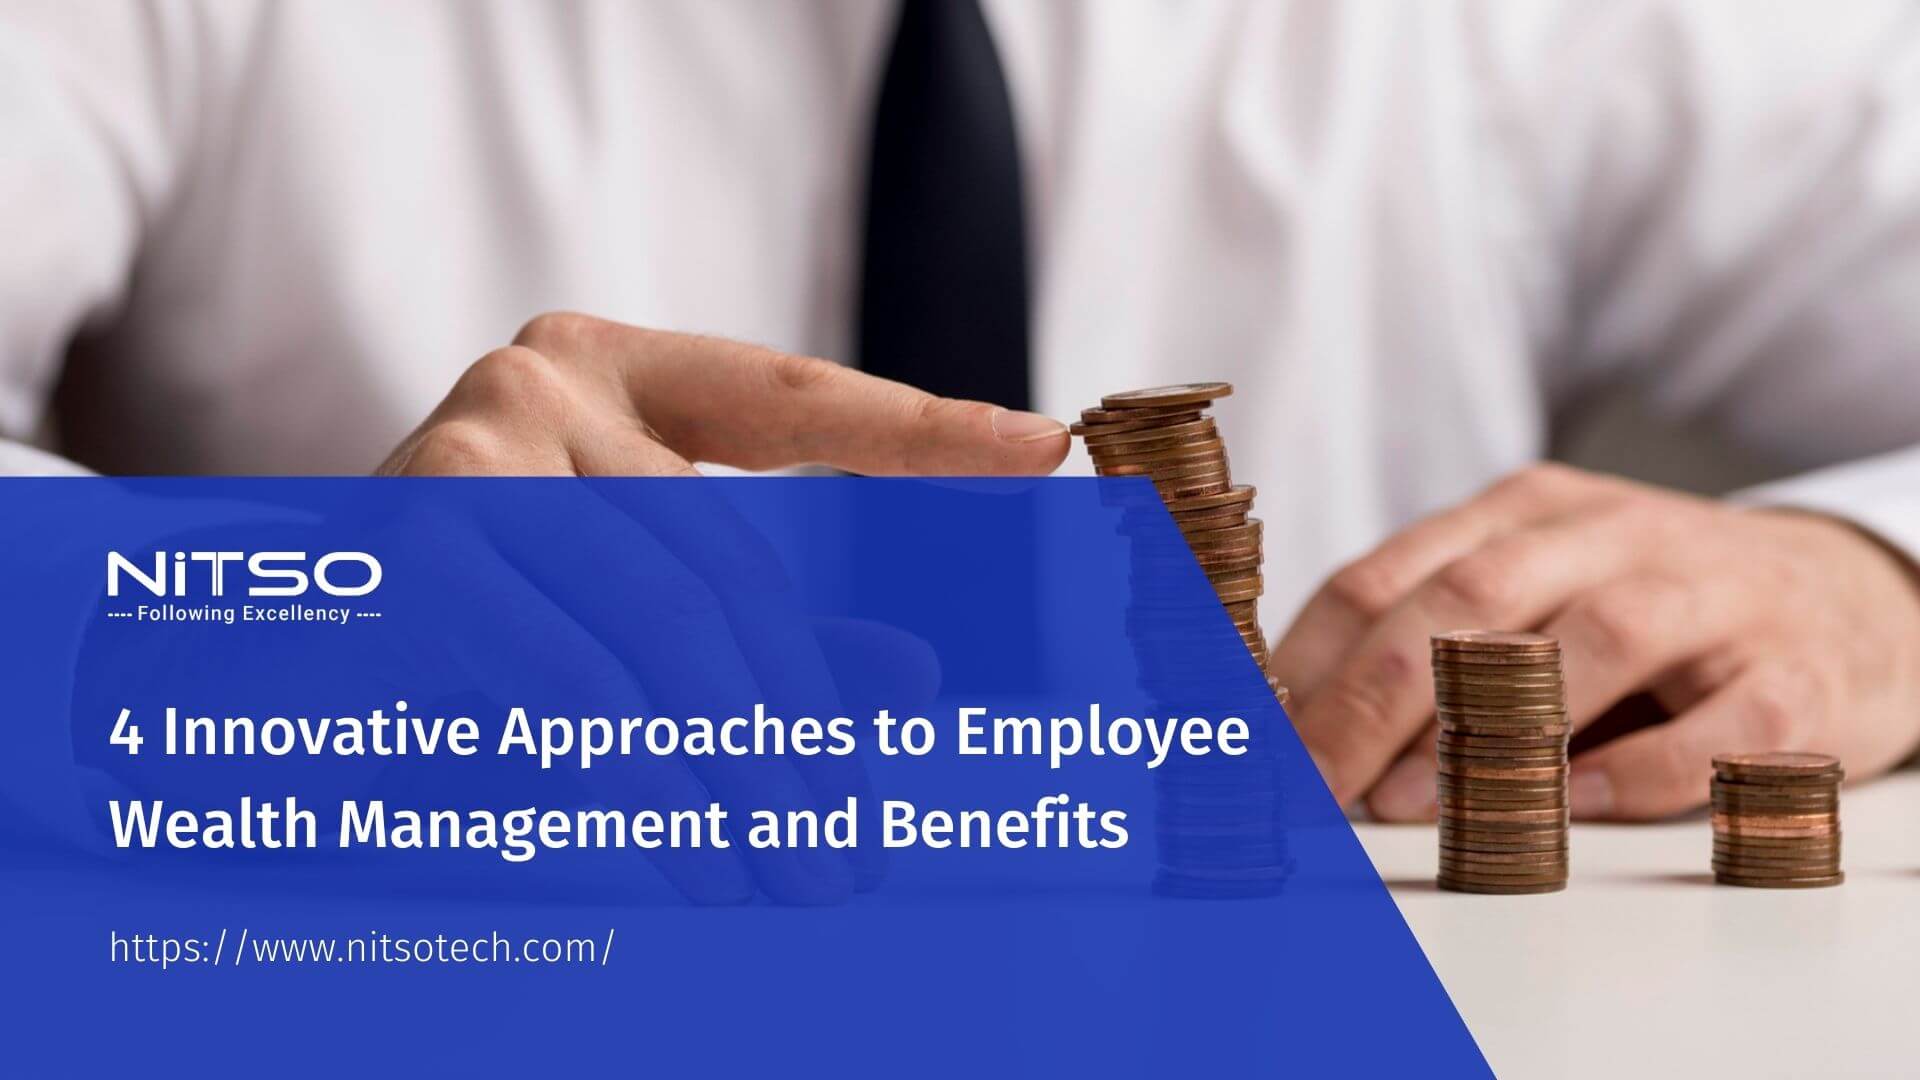 4 Innovative Approaches to Employee Wealth Management and Benefits